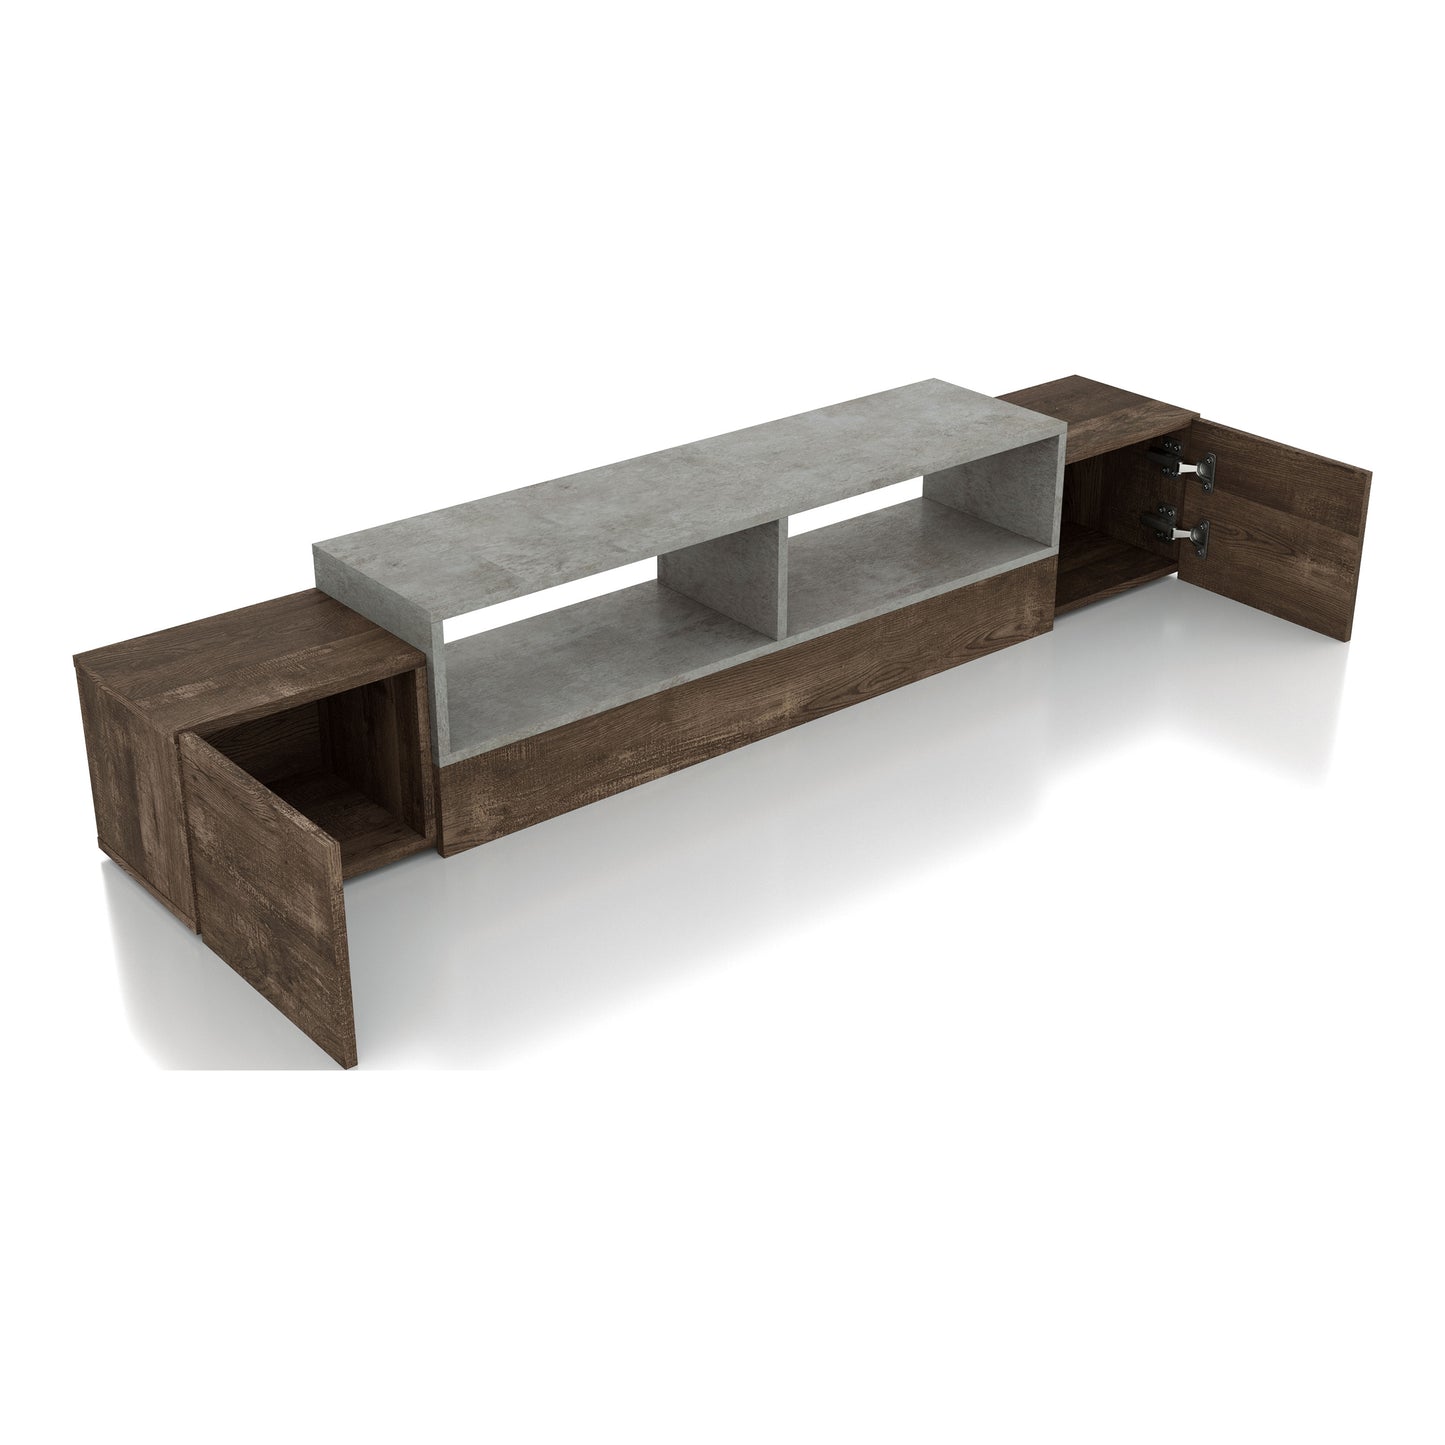 Right angled rustic reclaimed oak and gray wall mountable storage TV console with doors open on a white background